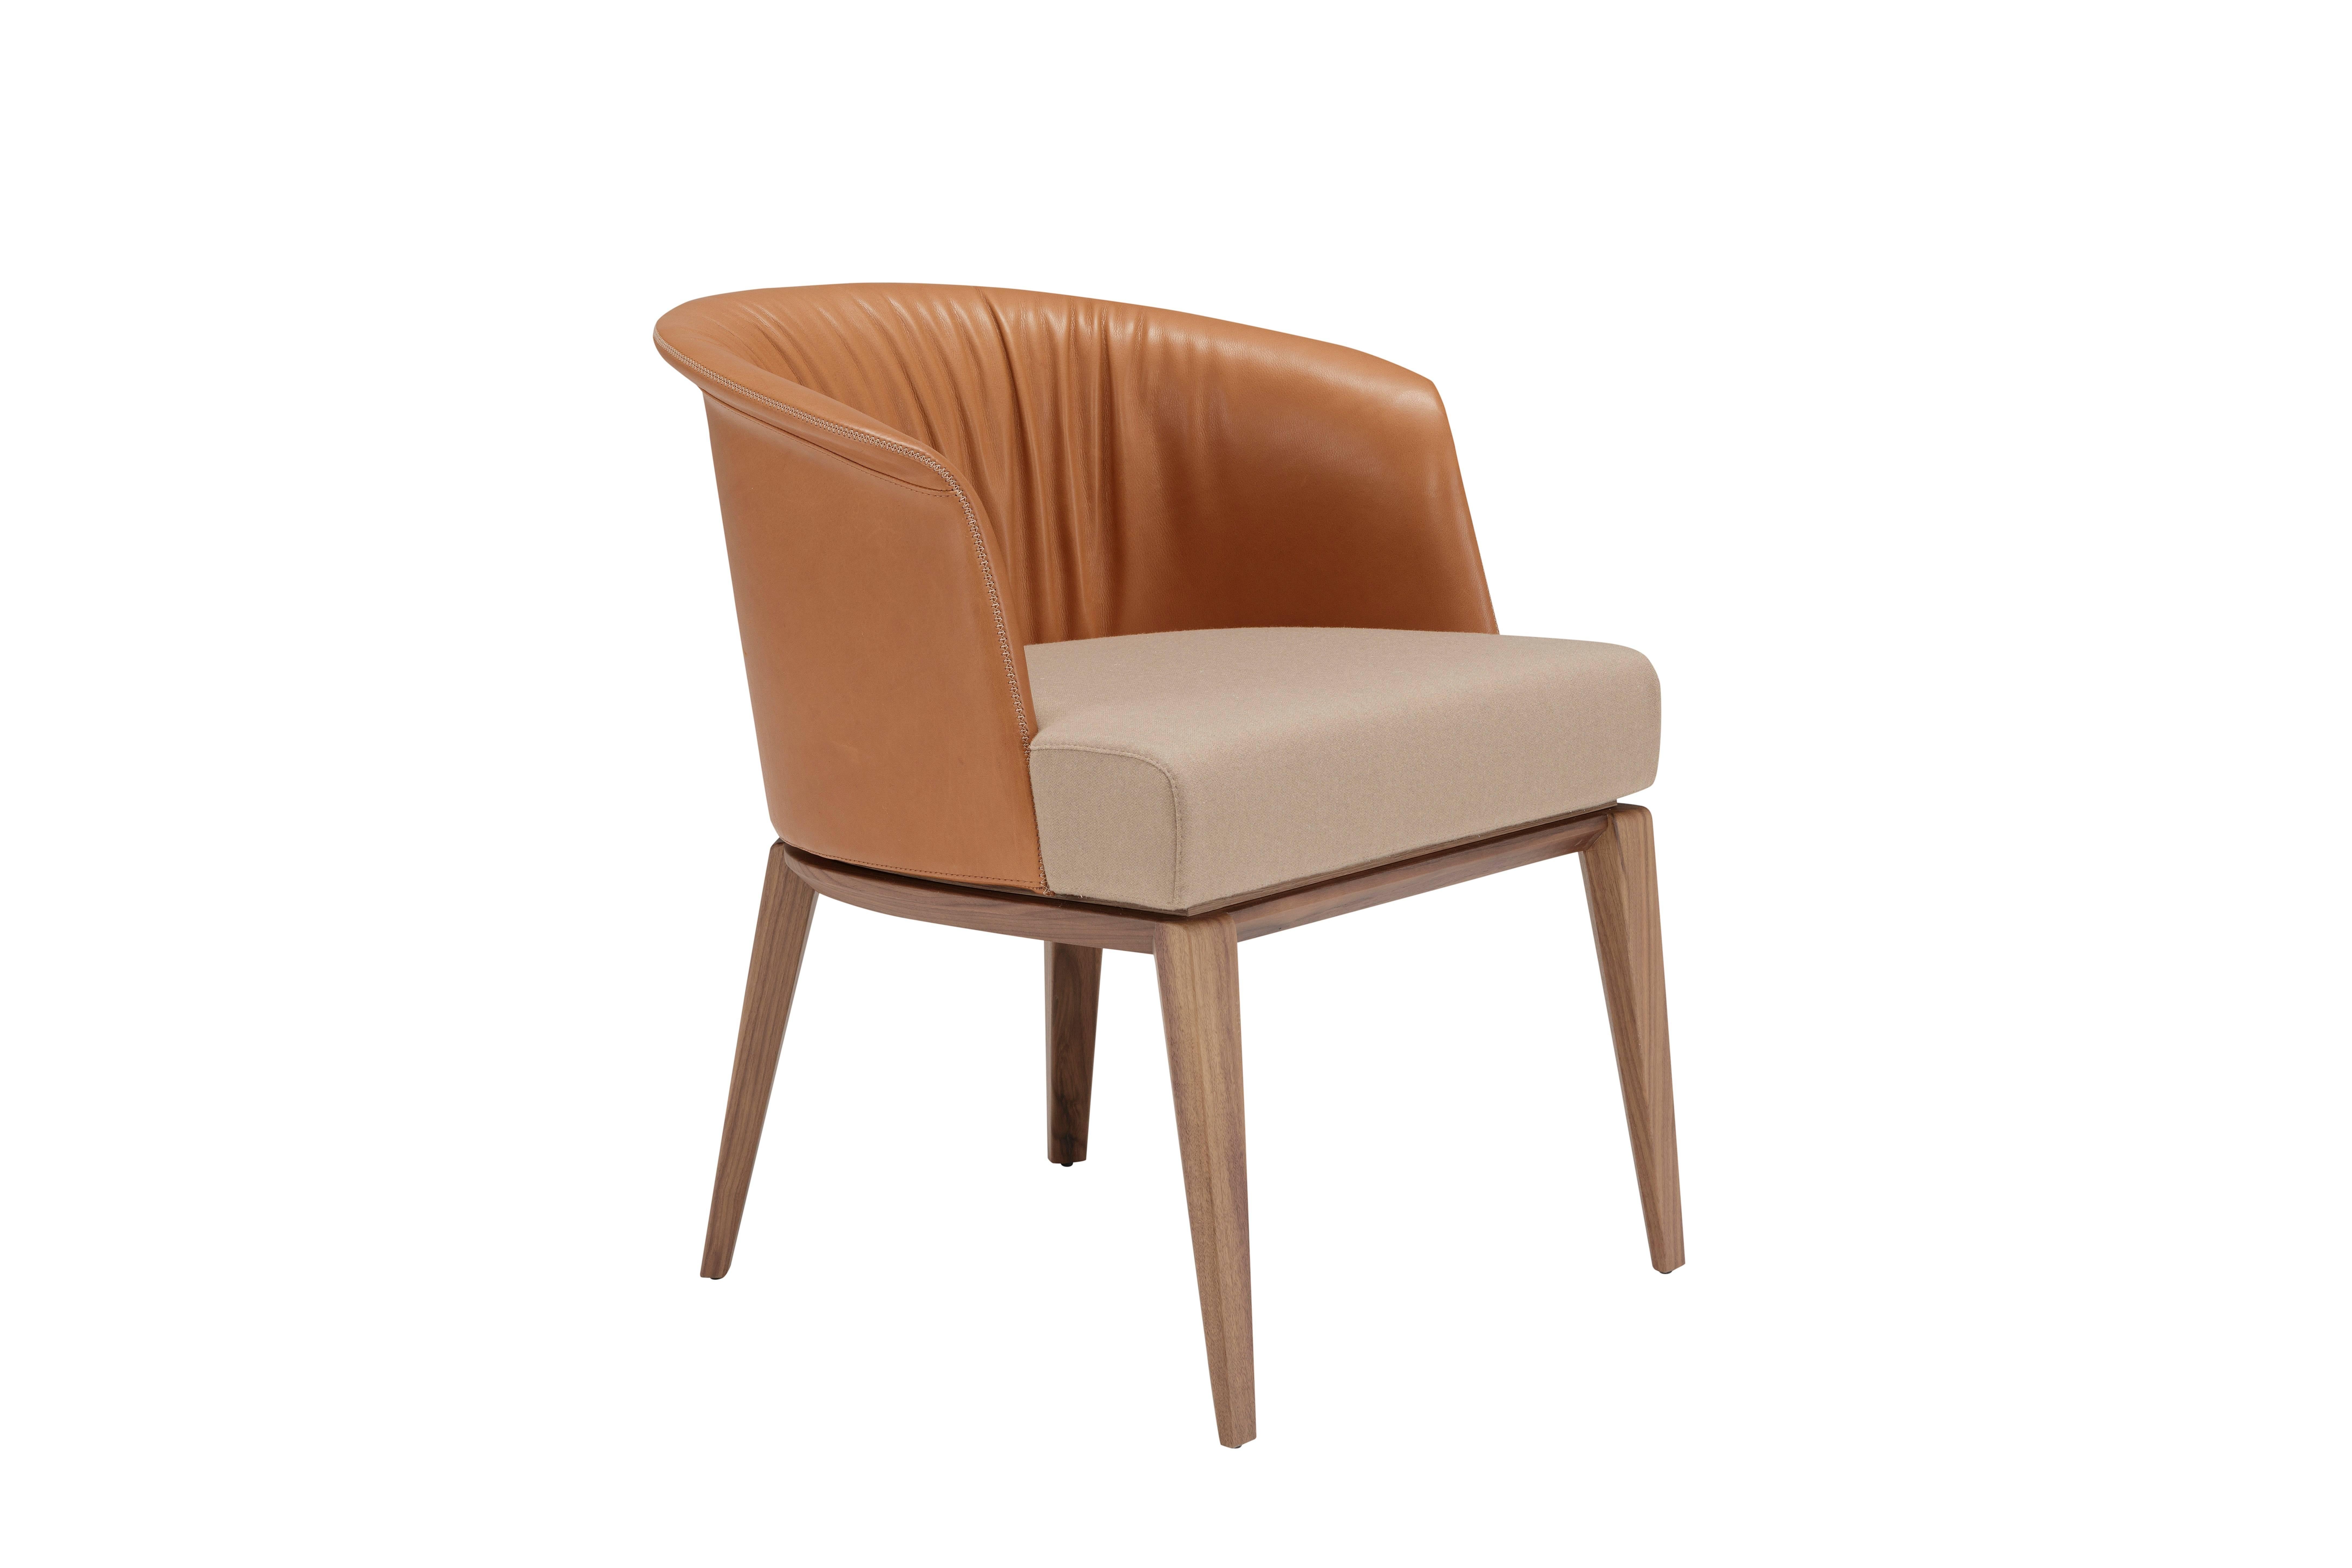 With its lightweight design, the Vincy armchair is perfect for a bedroom or a living room, and offers a comfortable seat, while adding a vintage touch to improve the aesthetic balance of the room. The possibility of using a different covering,